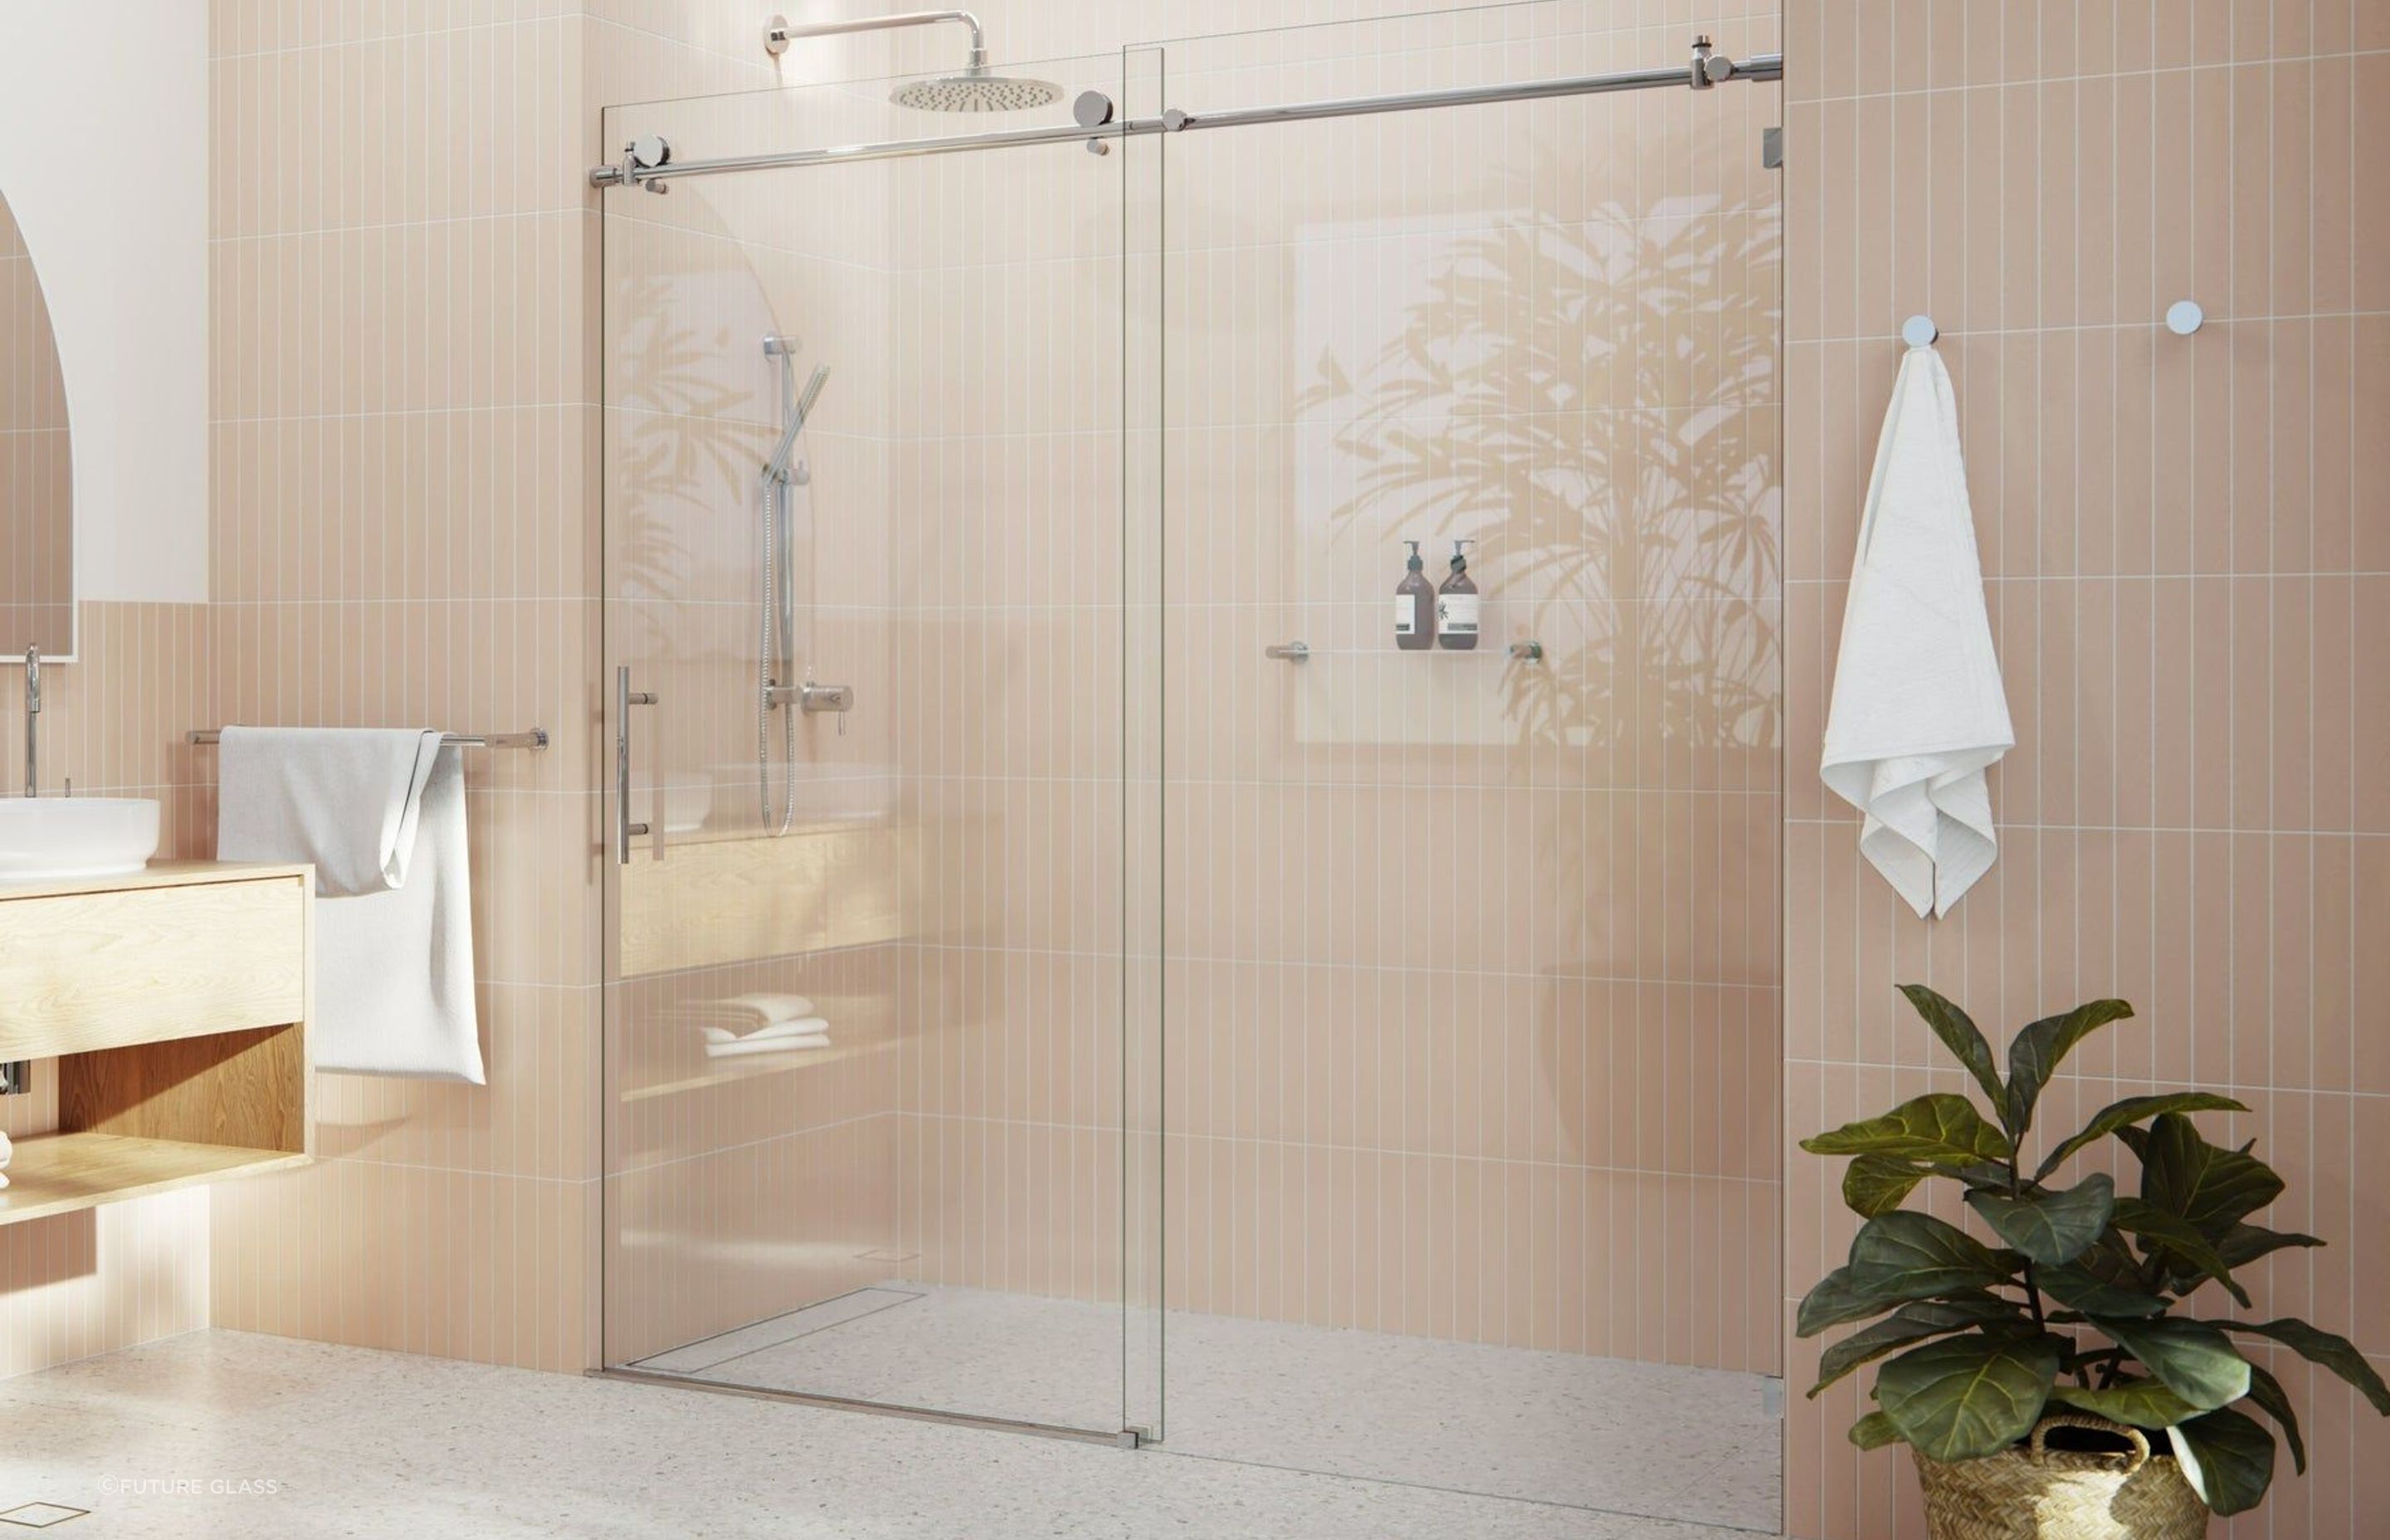 Sliding door shower screen can fit an existing shower space with ease. Featured product: Sliding Shower Screen.